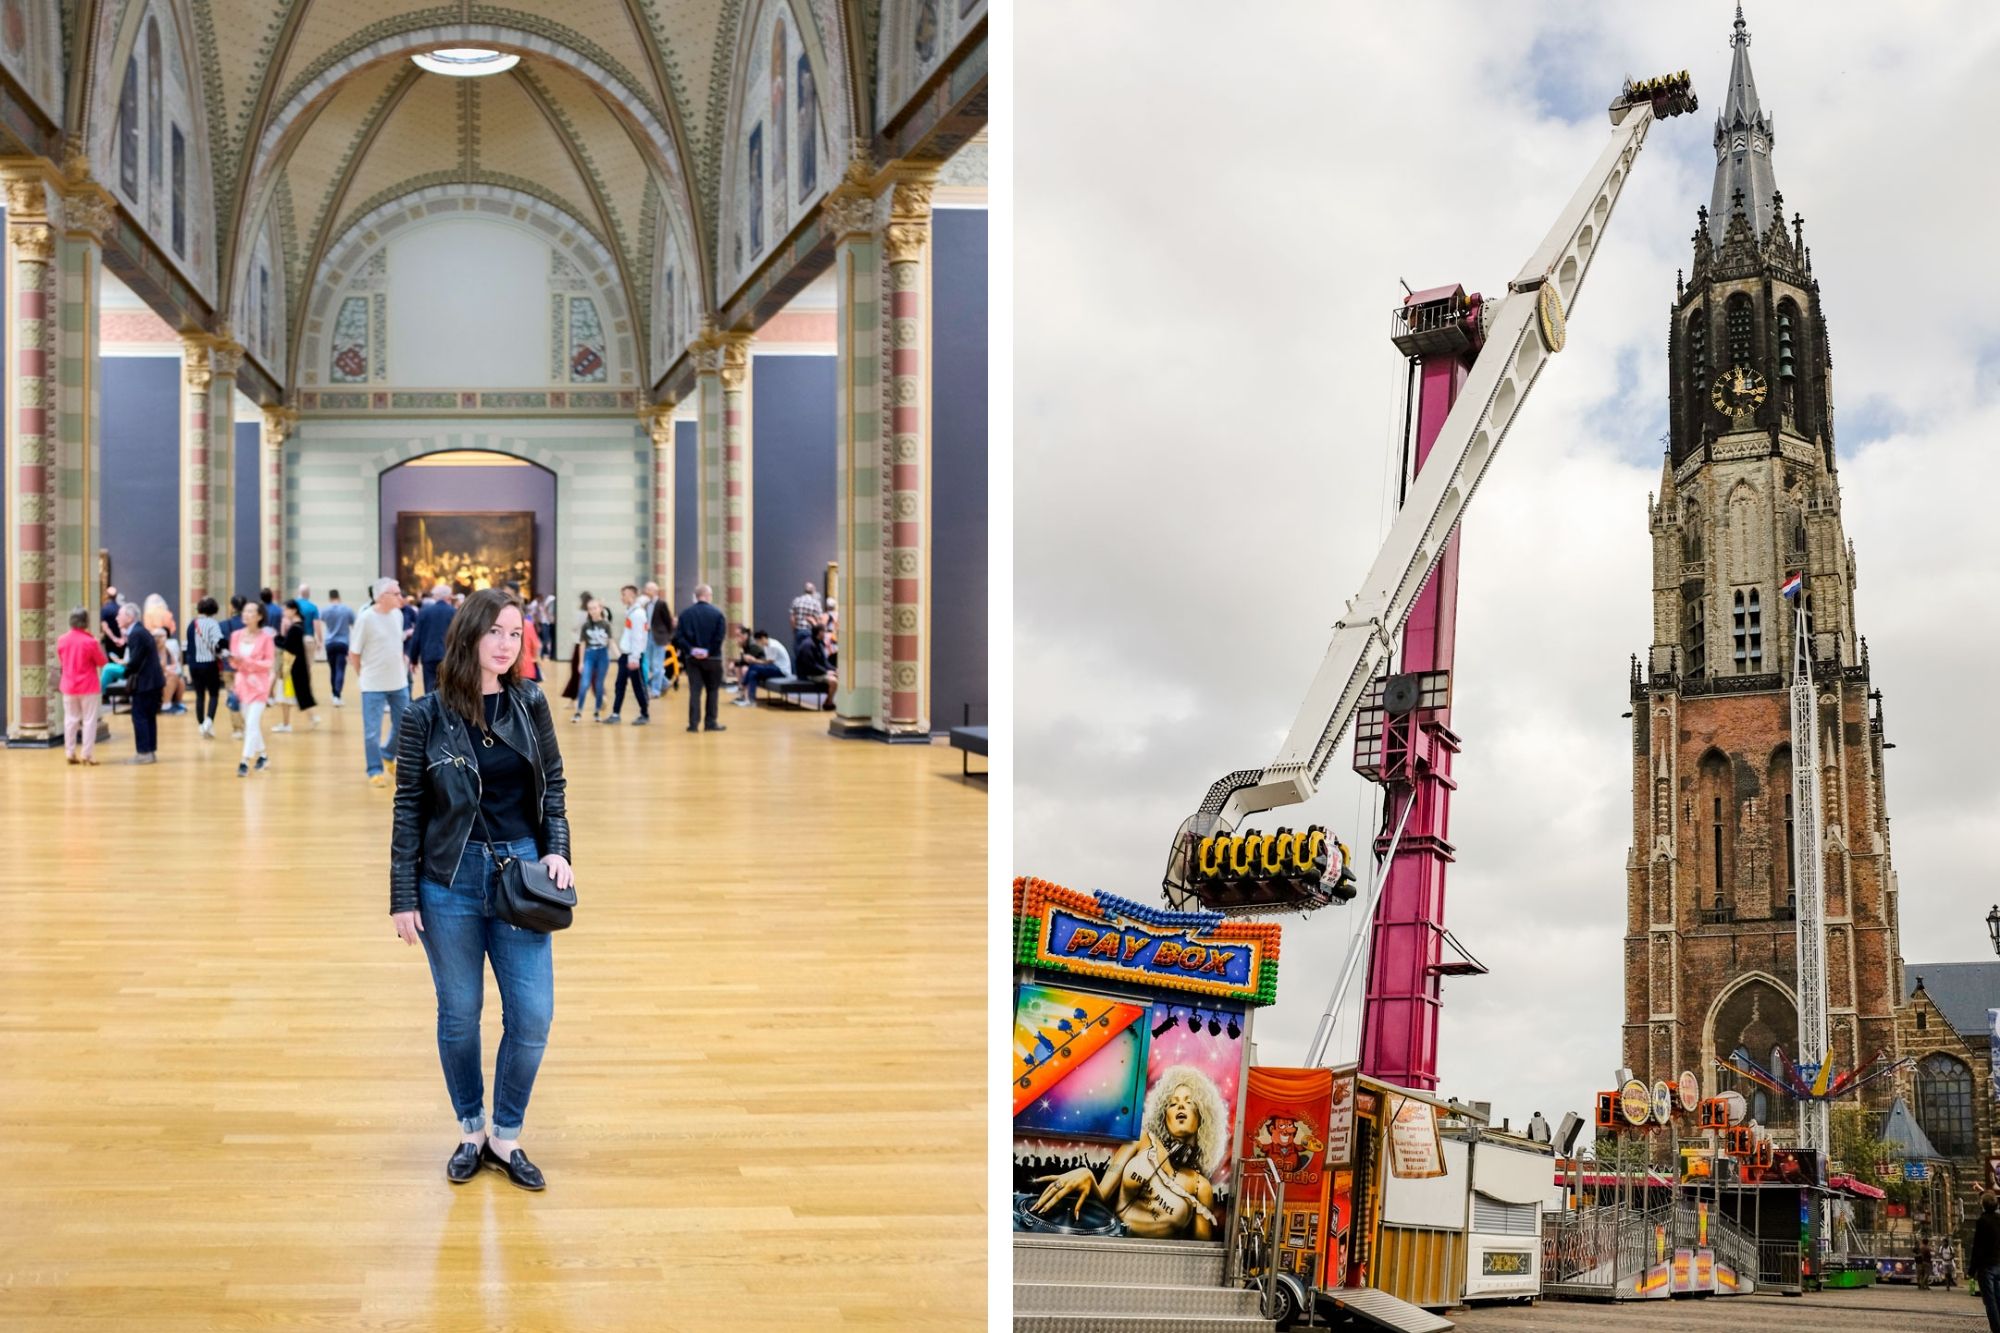 Collage: Krystal in front of the Night Watch painting and a fun fair in Delft